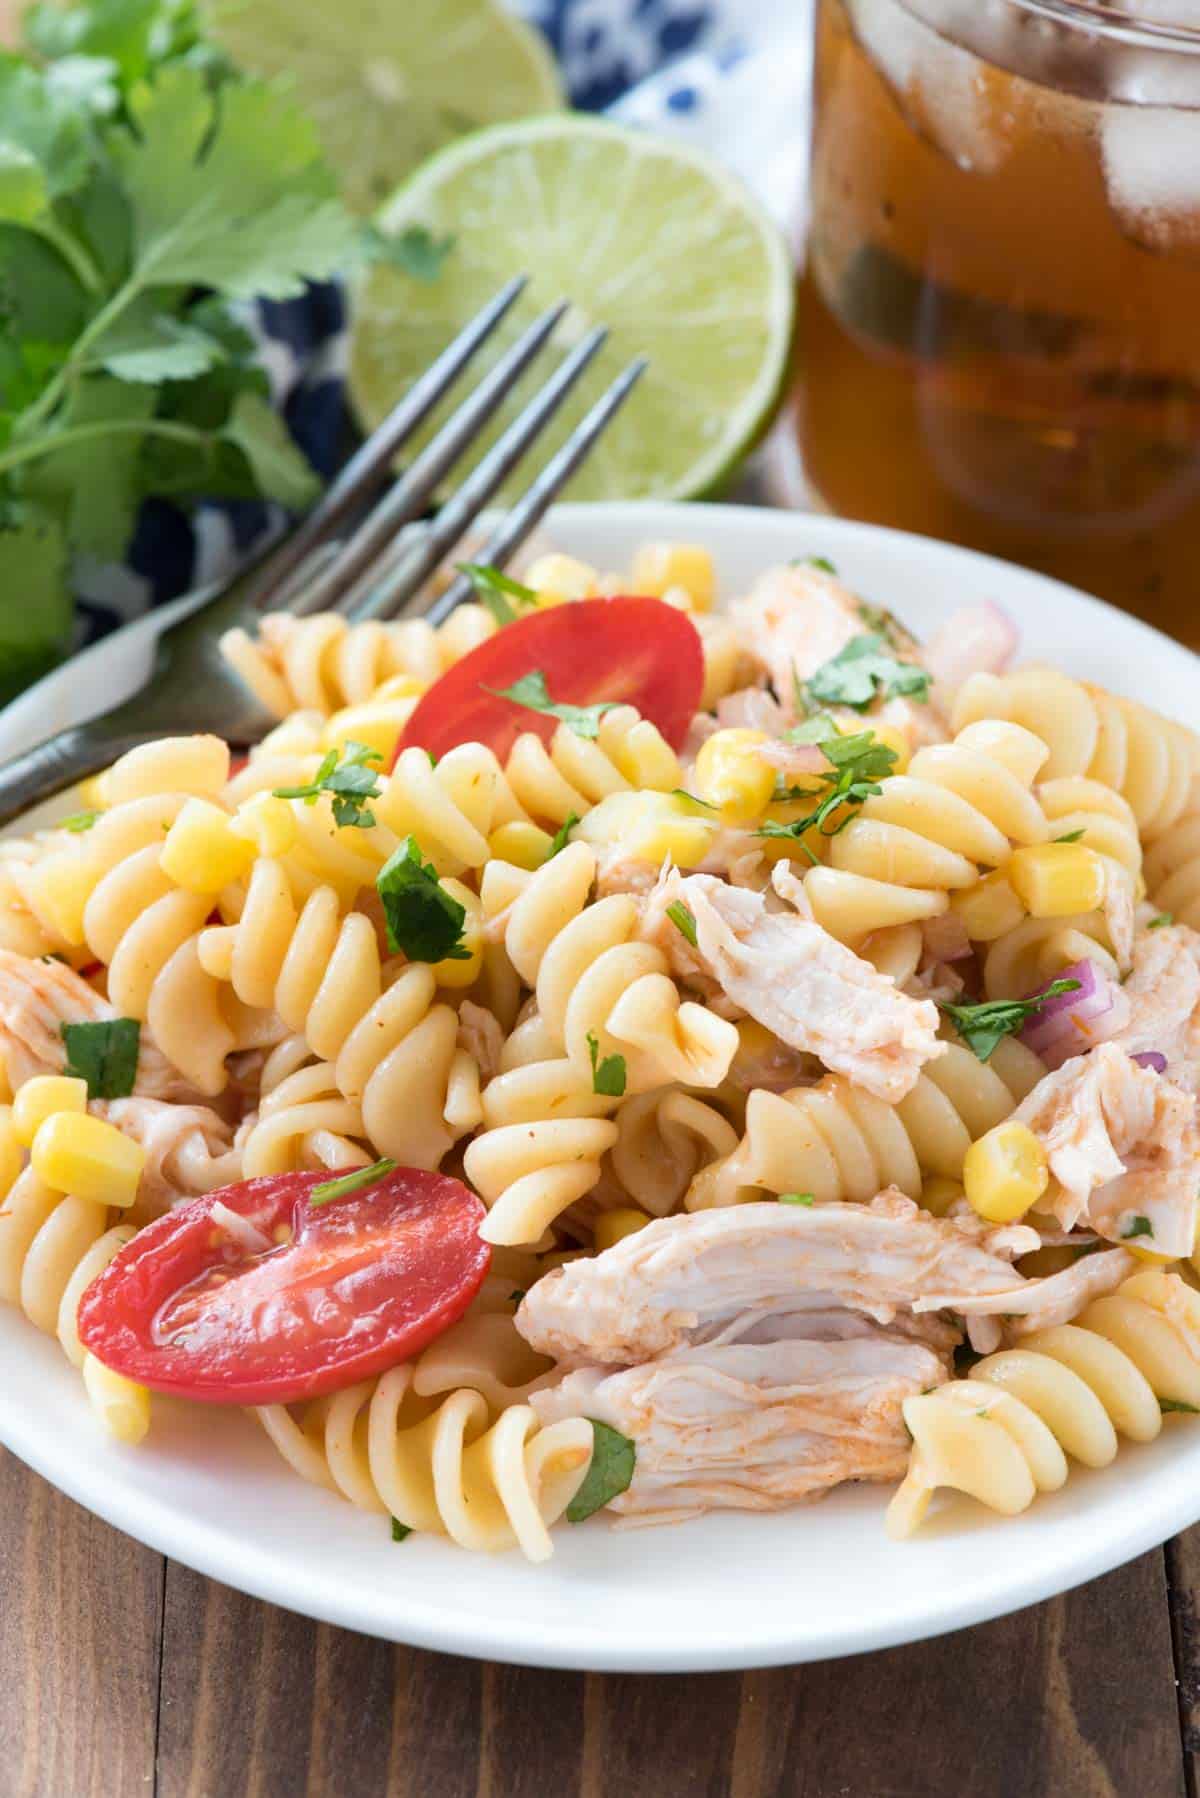 tomatoes and pasta and chicken mixed together.